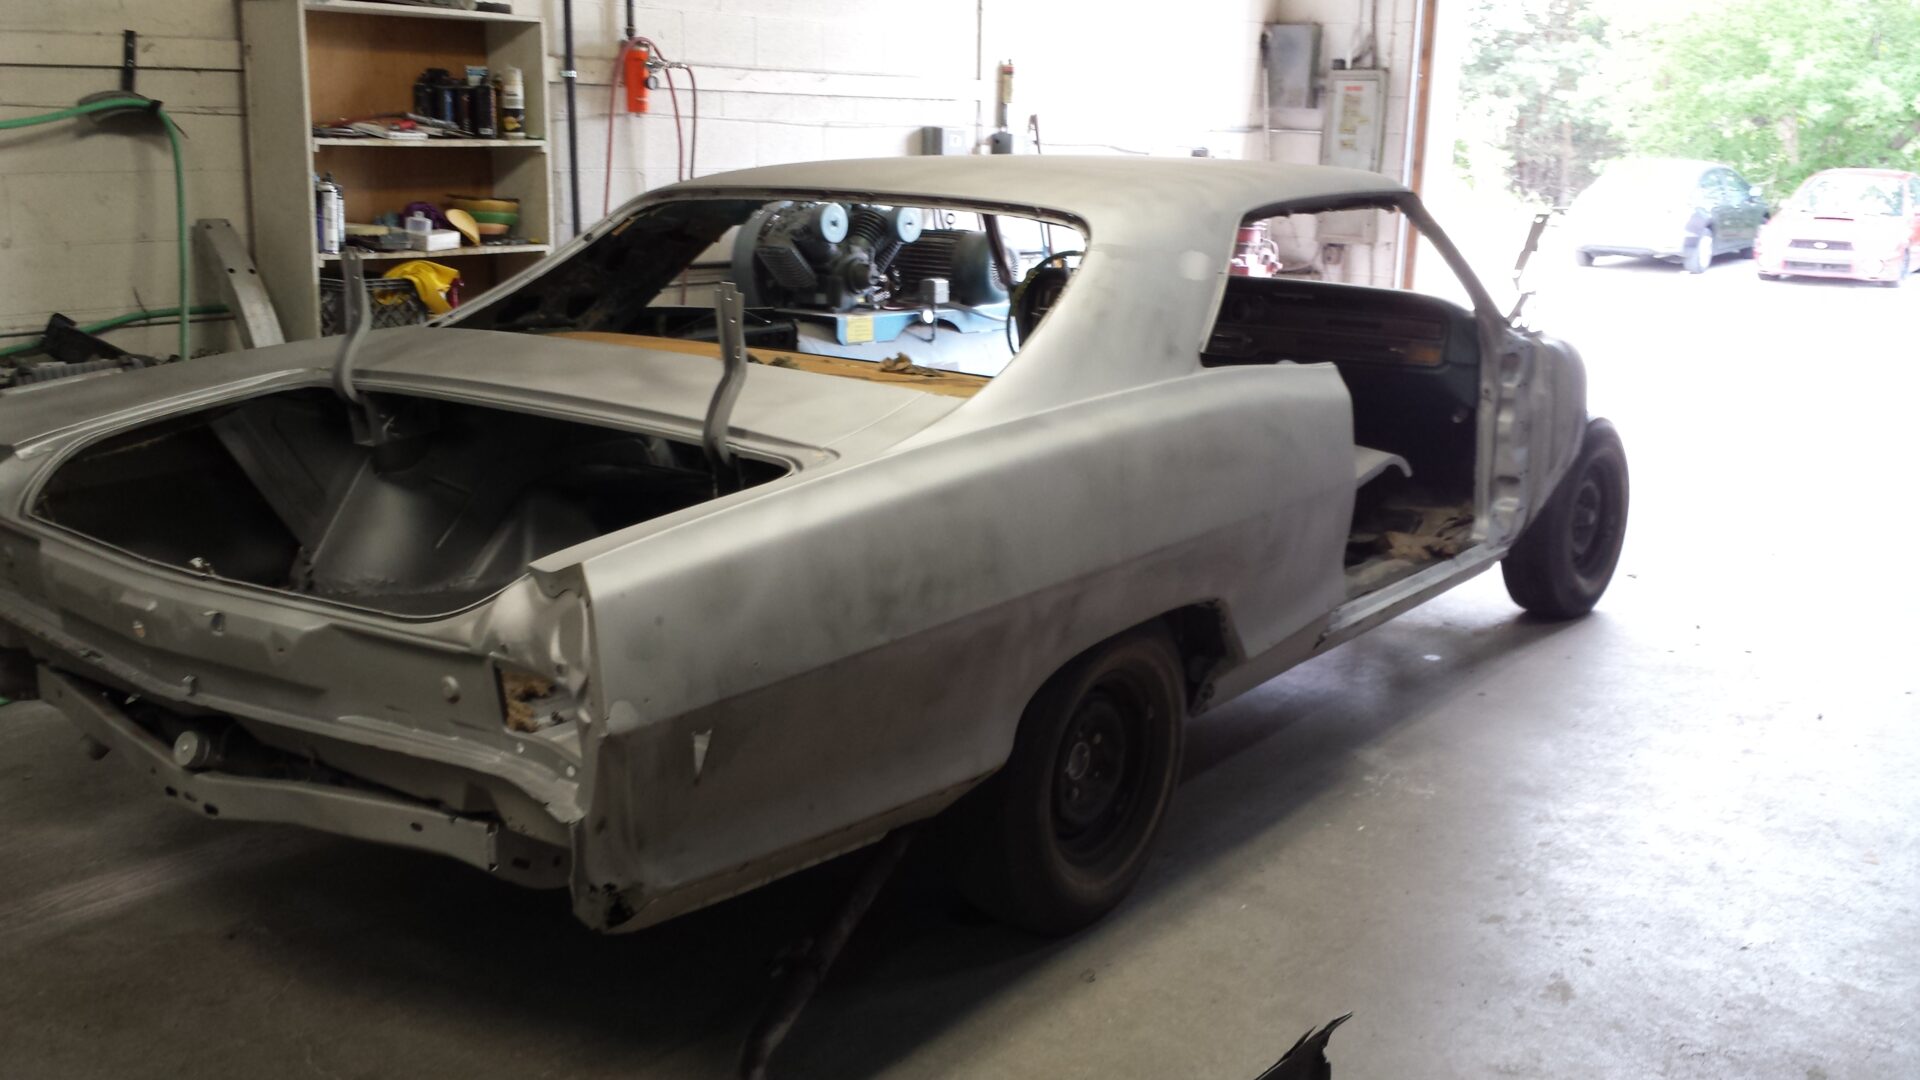 A 1965 Pontiac Grand Prix without parts and paint